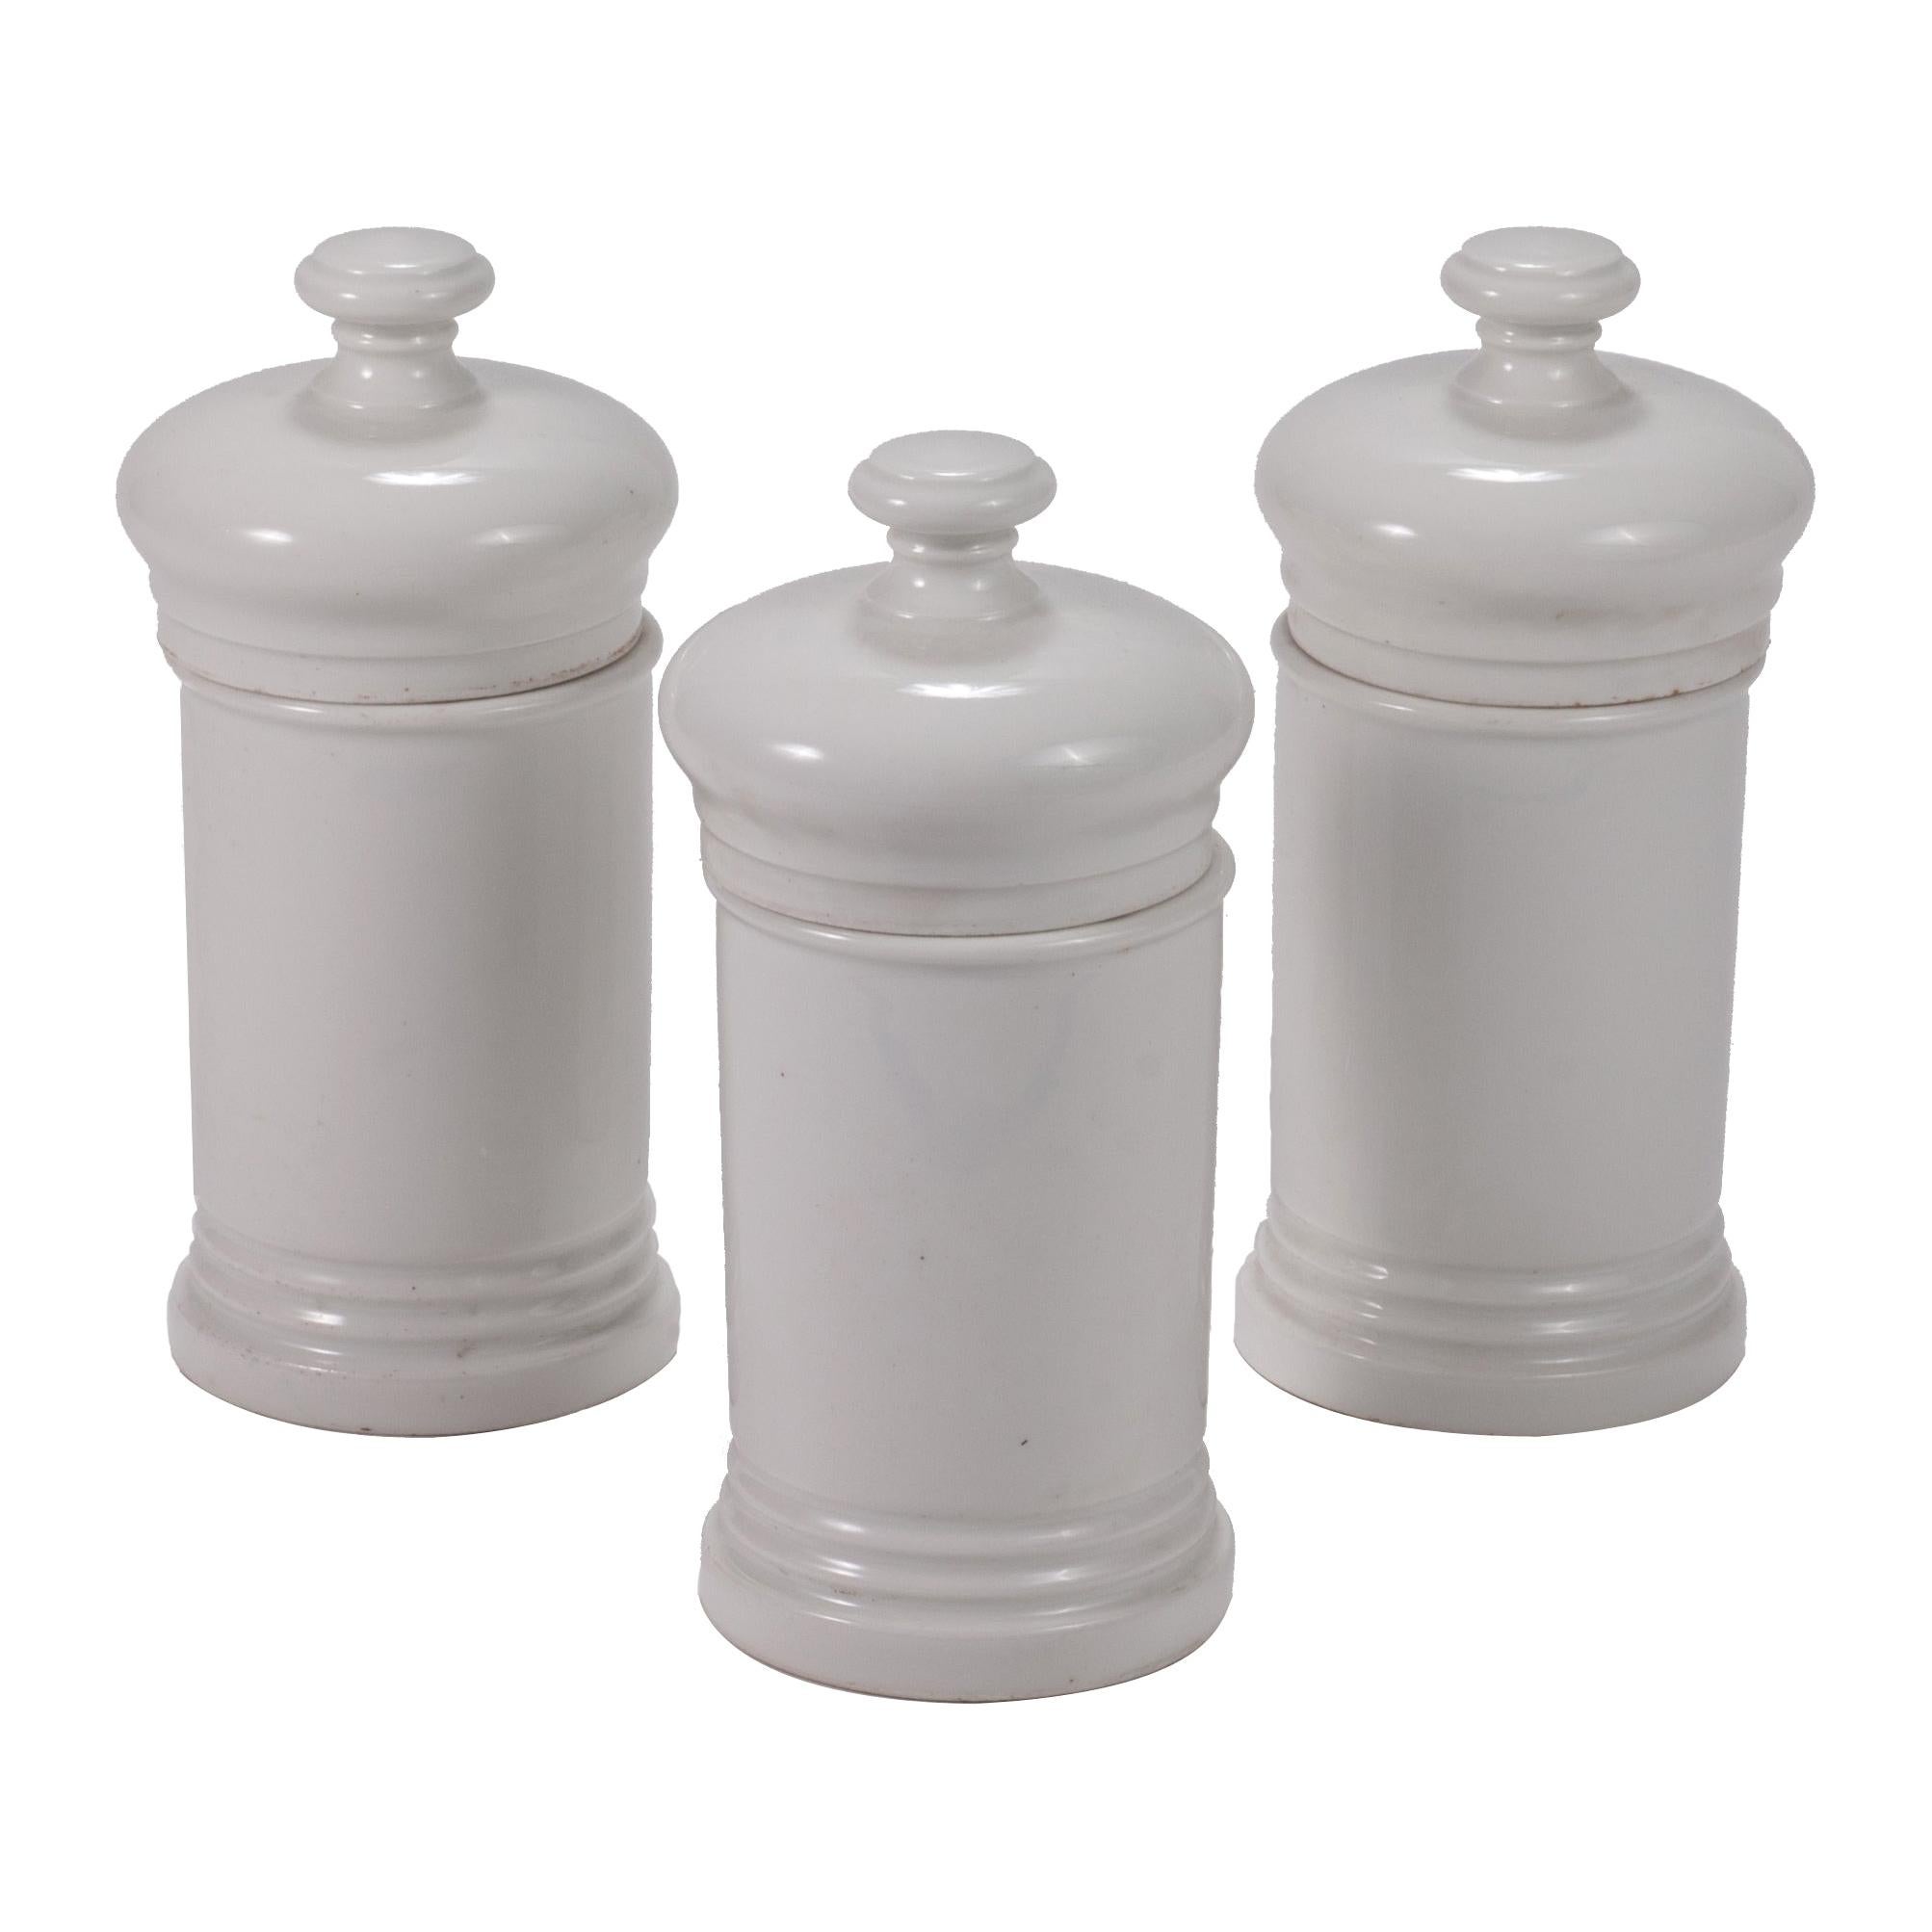 White Porcelain Canisters from an Herb Dispensary For Sale